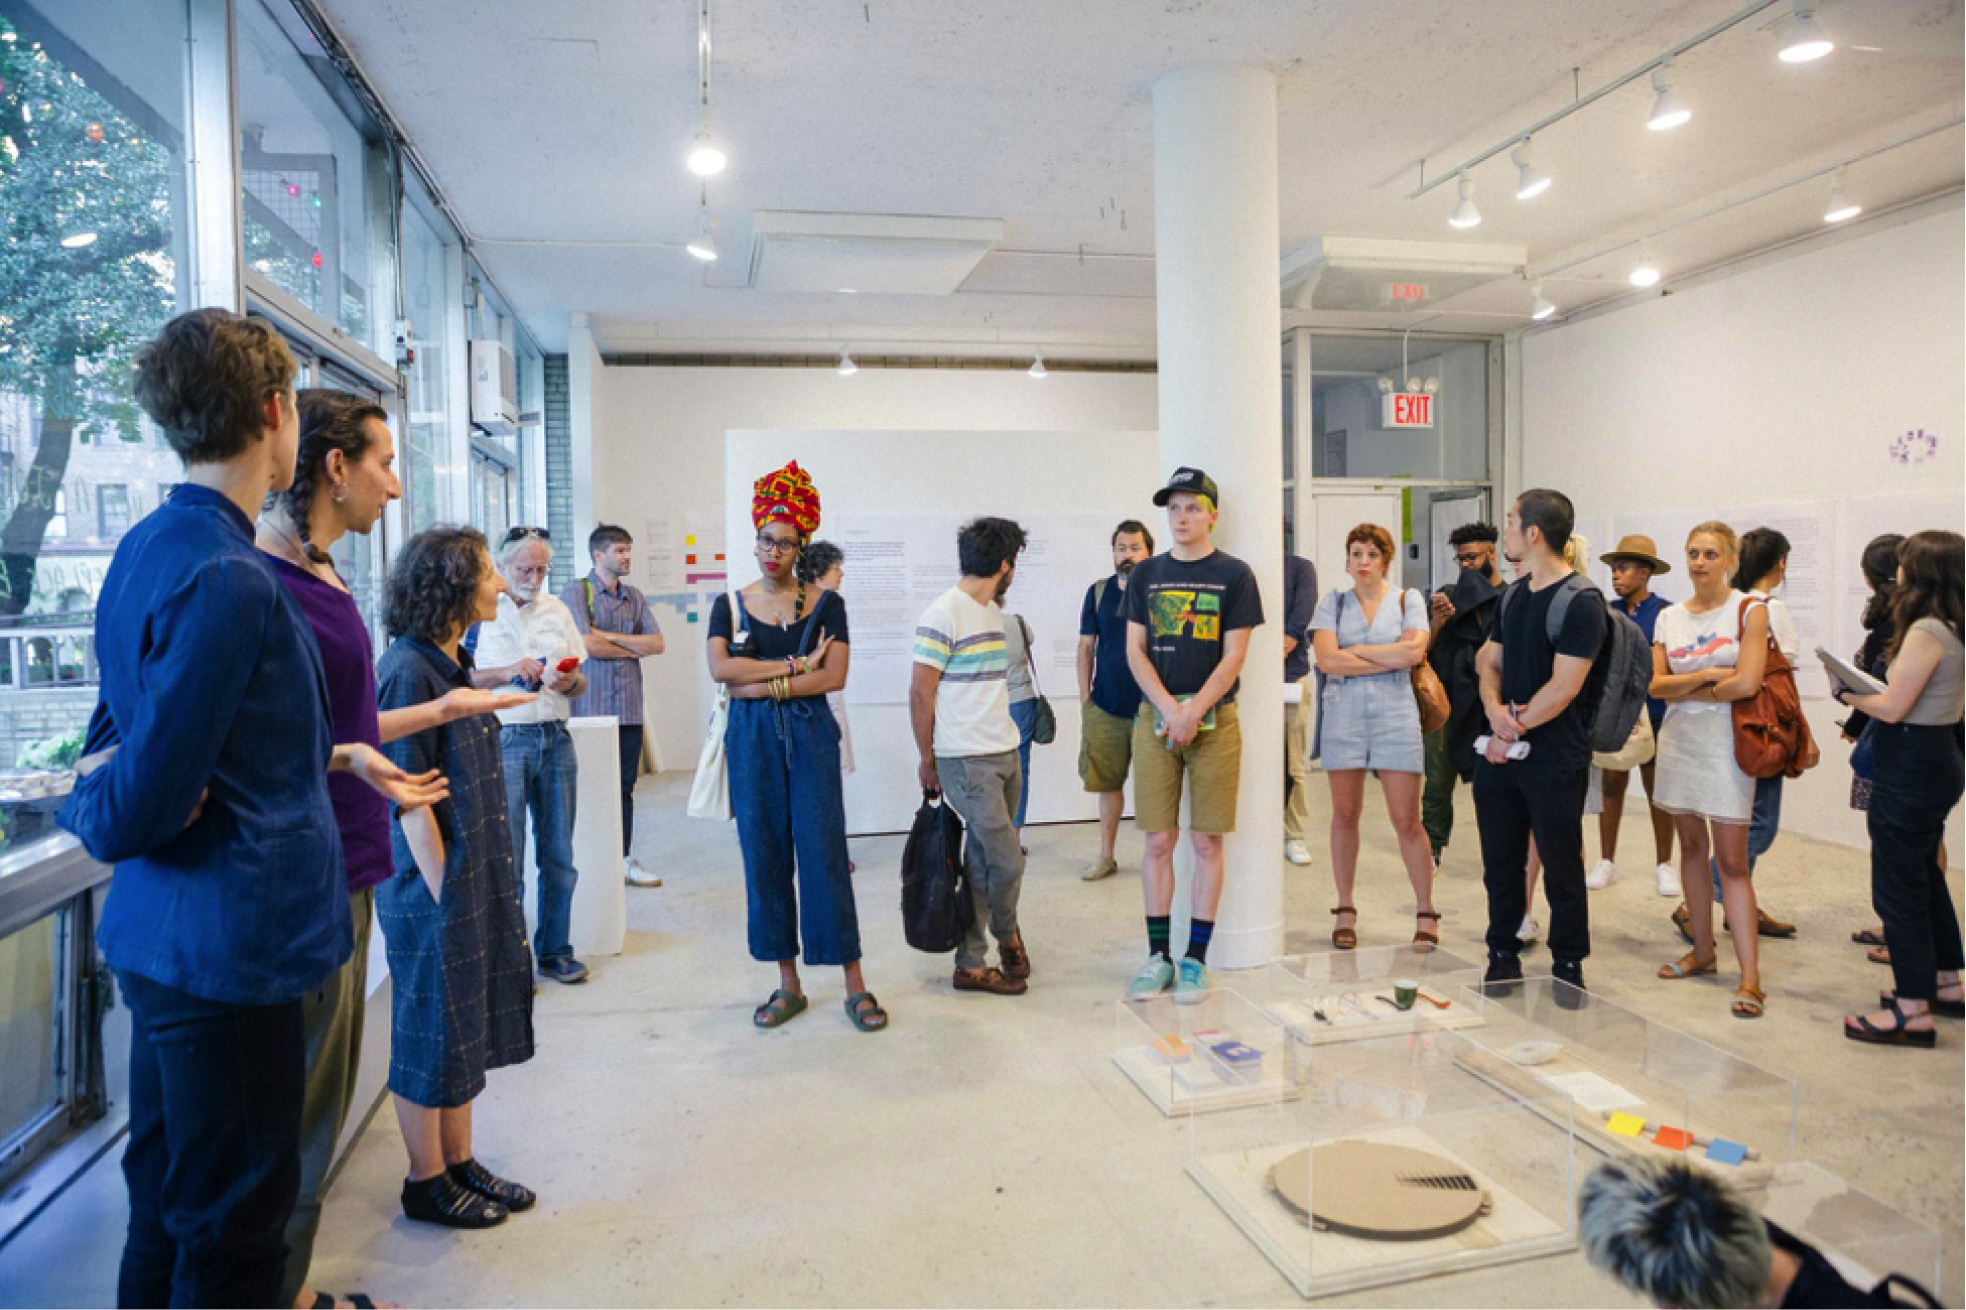 A group of a few dozen people of different ages and demographics stand in a gallery space around plexiglass containers on the floor containing objects. Their attention is on a person speaking.